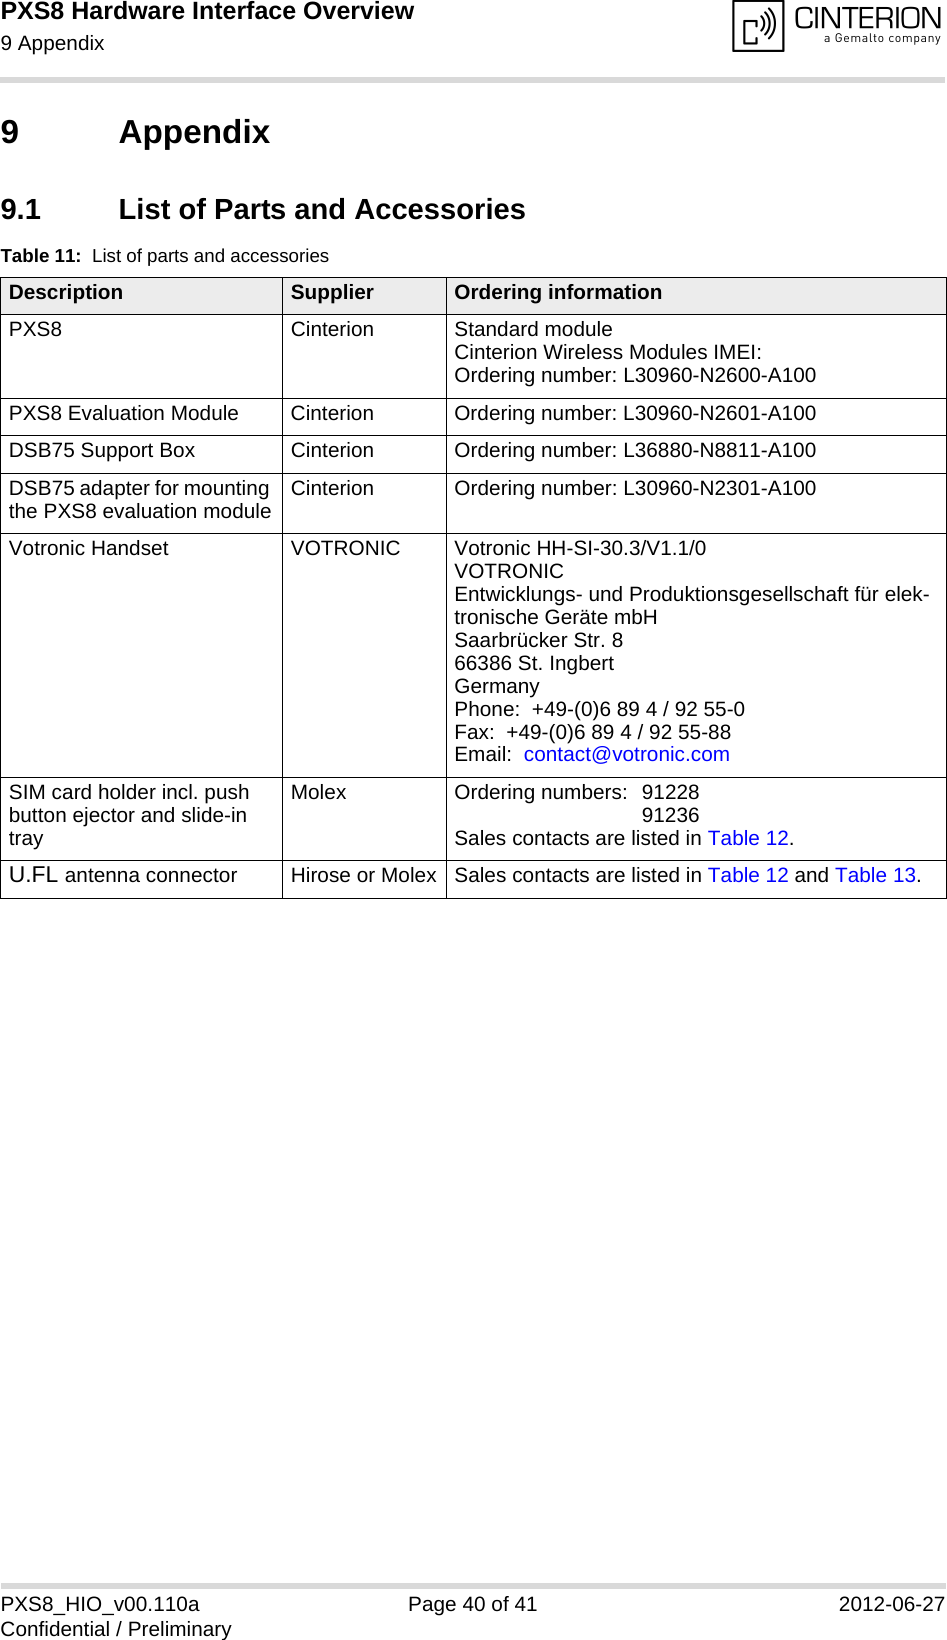 PXS8 Hardware Interface Overview9 Appendix41PXS8_HIO_v00.110a Page 40 of 41 2012-06-27Confidential / Preliminary9 Appendix9.1 List of Parts and AccessoriesTable 11:  List of parts and accessoriesDescription Supplier Ordering informationPXS8 Cinterion Standard module Cinterion Wireless Modules IMEI:Ordering number: L30960-N2600-A100PXS8 Evaluation Module Cinterion Ordering number: L30960-N2601-A100DSB75 Support Box Cinterion Ordering number: L36880-N8811-A100DSB75 adapter for mounting the PXS8 evaluation module Cinterion Ordering number: L30960-N2301-A100Votronic Handset VOTRONIC Votronic HH-SI-30.3/V1.1/0VOTRONIC Entwicklungs- und Produktionsgesellschaft für elek-tronische Geräte mbHSaarbrücker Str. 866386 St. IngbertGermanyPhone:  +49-(0)6 89 4 / 92 55-0Fax:  +49-(0)6 89 4 / 92 55-88Email:  contact@votronic.comSIM card holder incl. push button ejector and slide-in trayMolex Ordering numbers:  91228 91236Sales contacts are listed in Table 12.U.FL antenna connector Hirose or Molex Sales contacts are listed in Table 12 and Table 13.